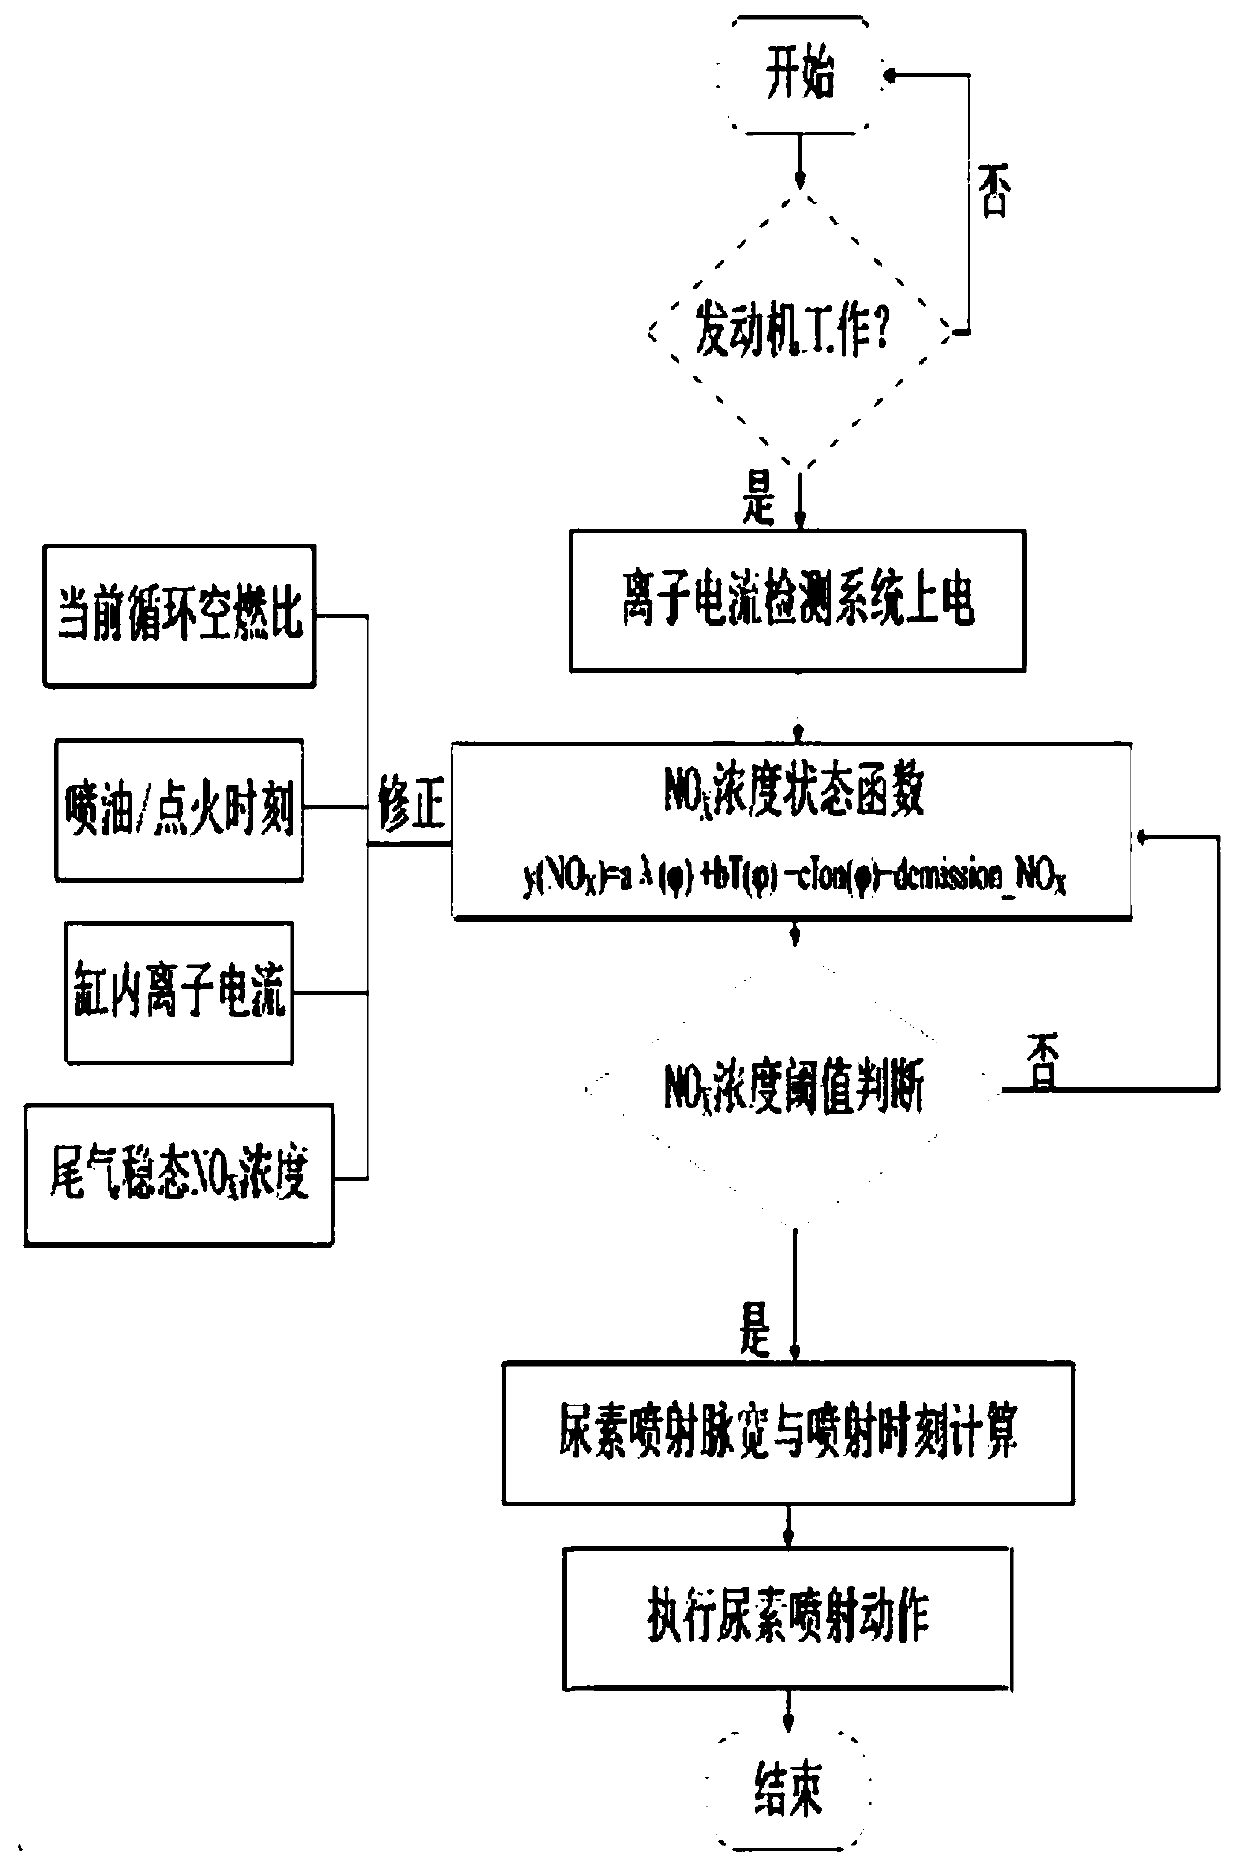 In-cylinder ion current and urea injection type closed-loop control system for nitrogen oxide emission of internal combustion engine